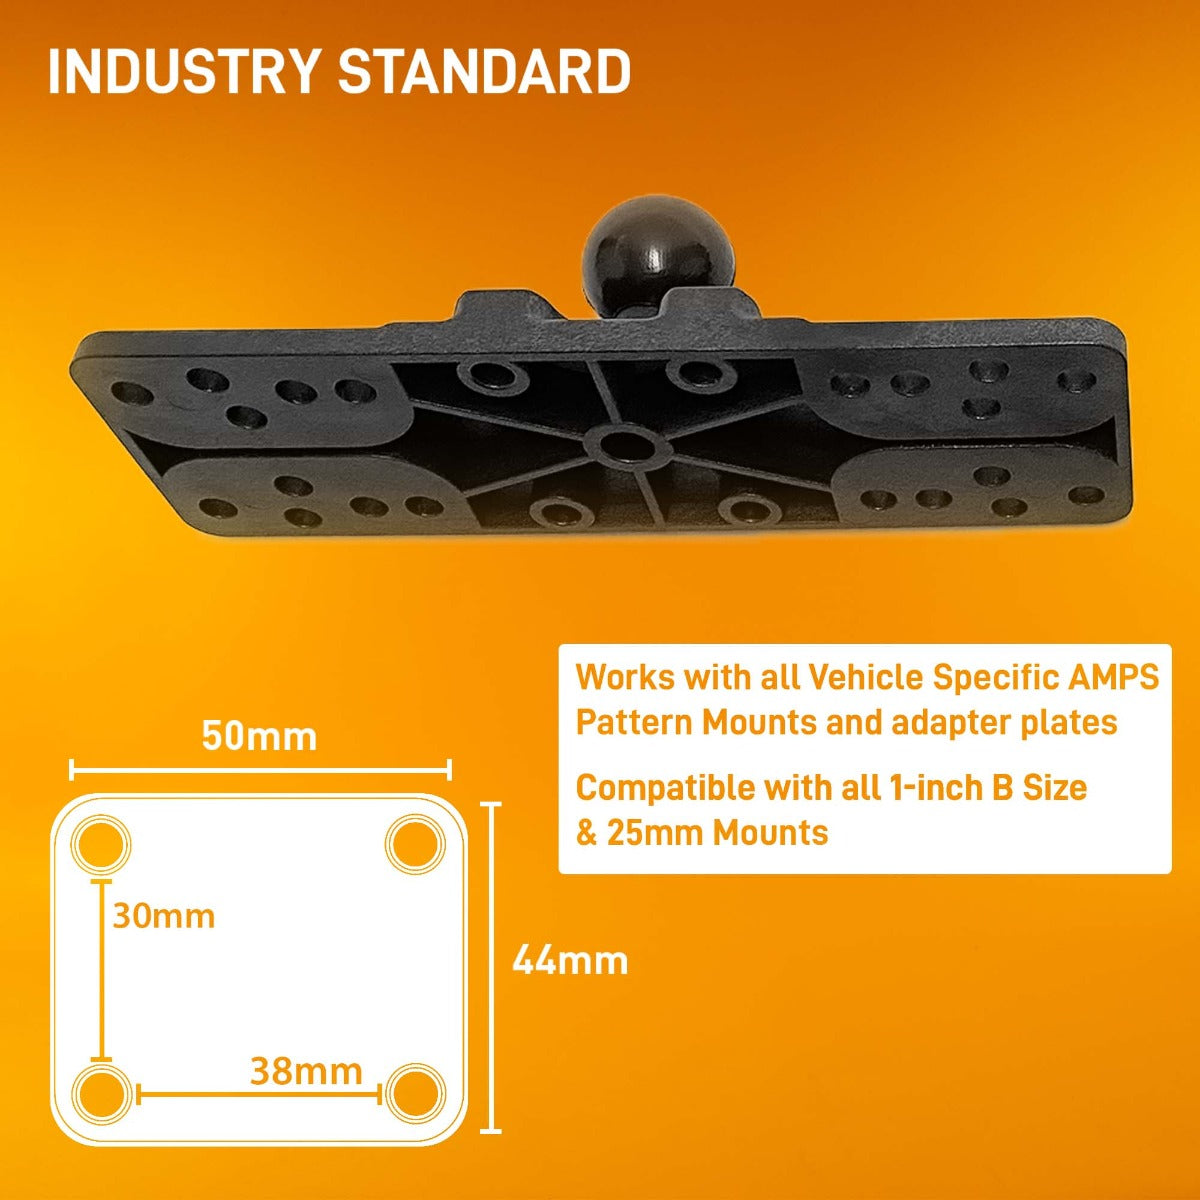 iBOLT™ 25mm / 1 inch Ball Composite Universal Marine Fish Finder Mounting Plate